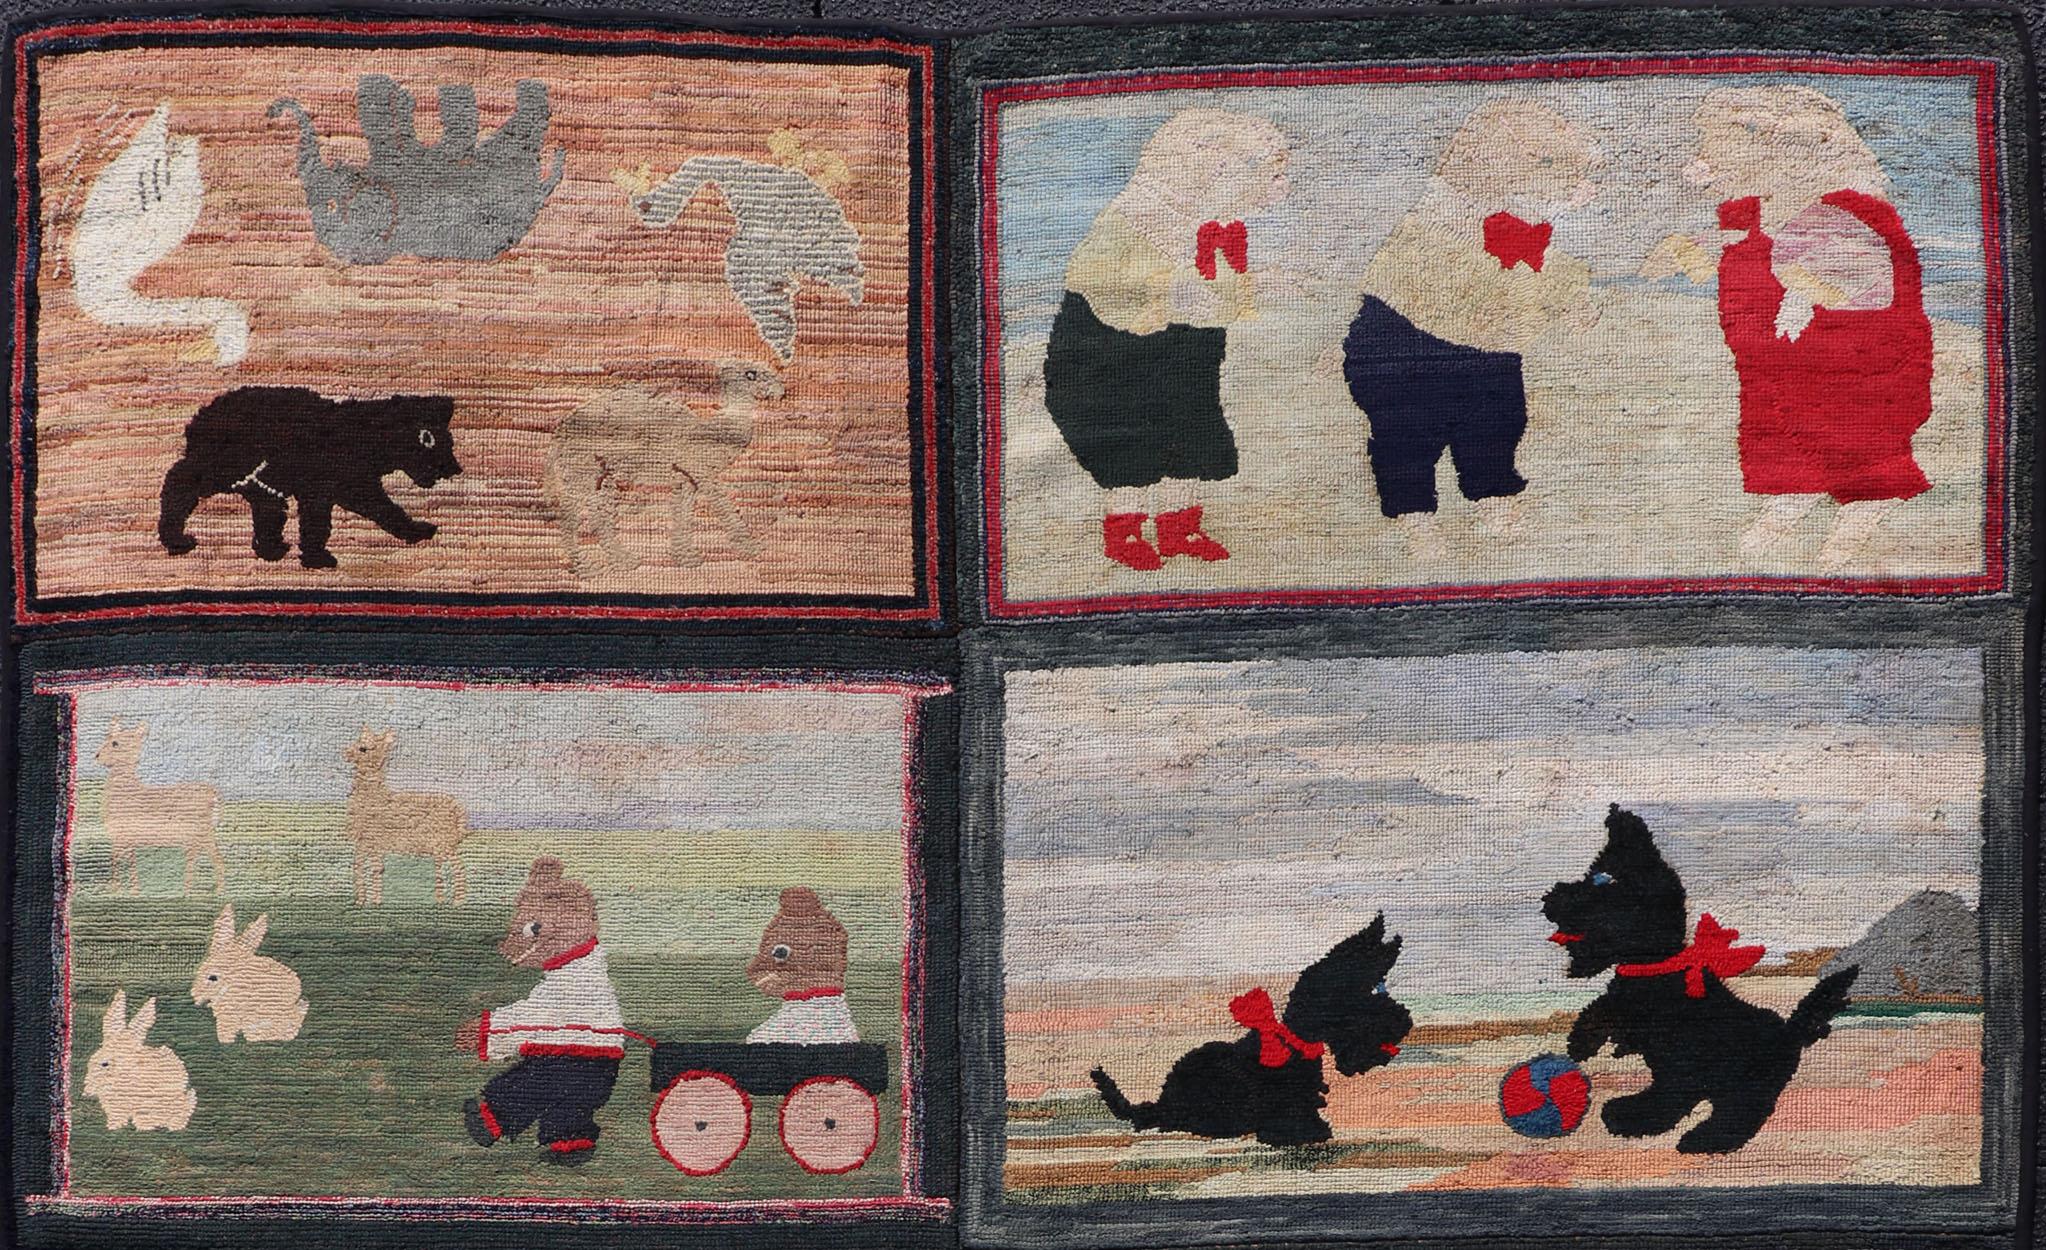 Large American Antique hooked rug with Panel of Children's Rhymes in different character , Keivan Woven Arts/ rug R20-0829, country of origin / type: United States / Hooked, circa 1900

Measures: 6'8 x 8'2

This stunning antique hooked rug is a